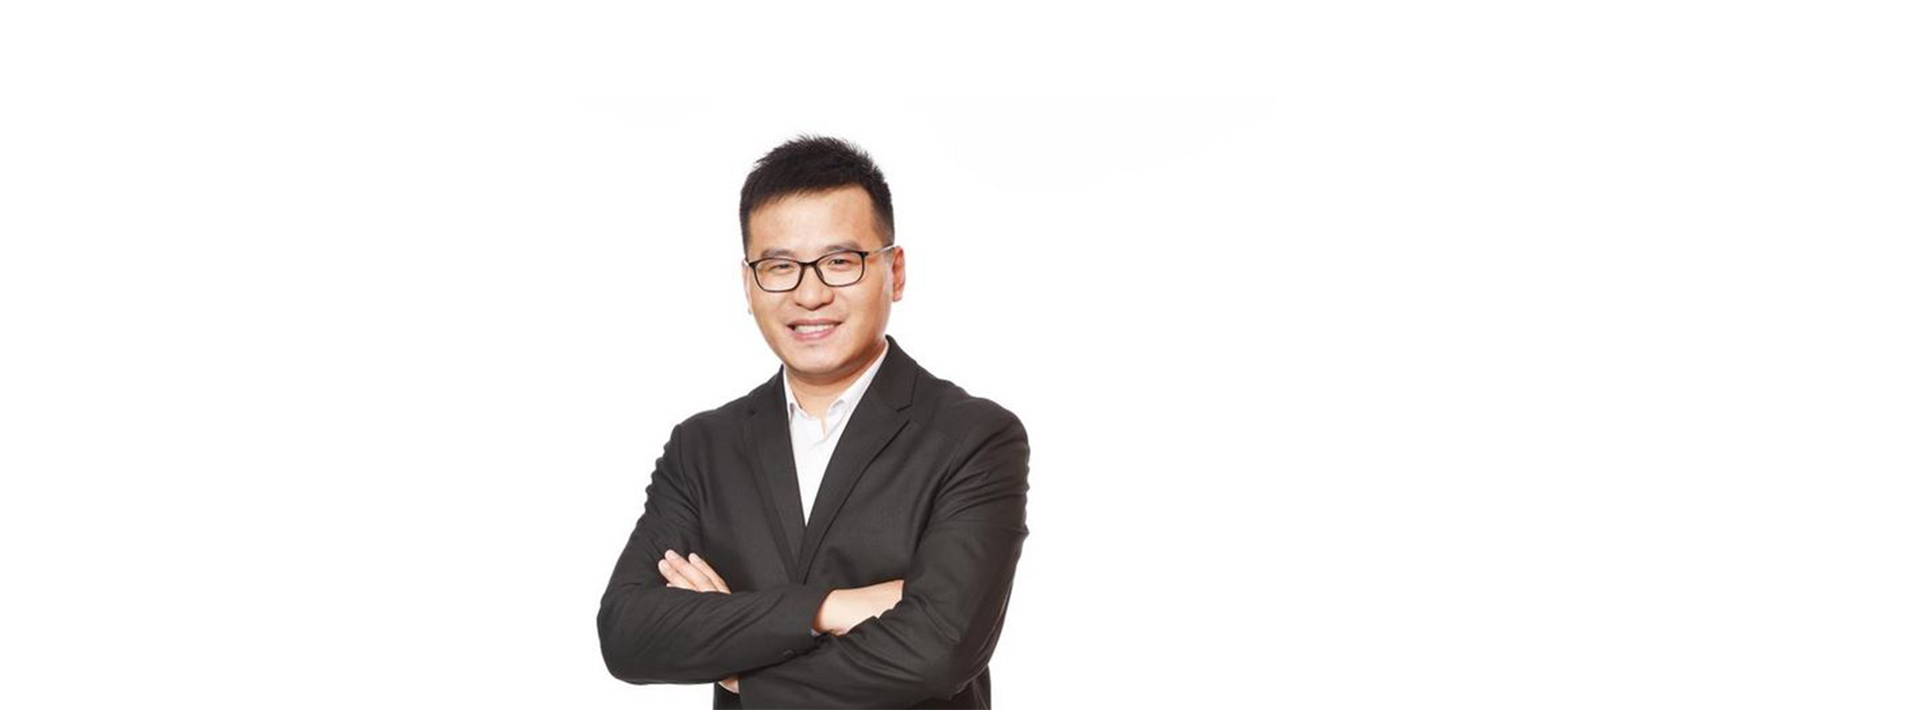 CEE Research Affiliate Hao Sun named one of Forbes Magazine’s 30 Under 30 in Science